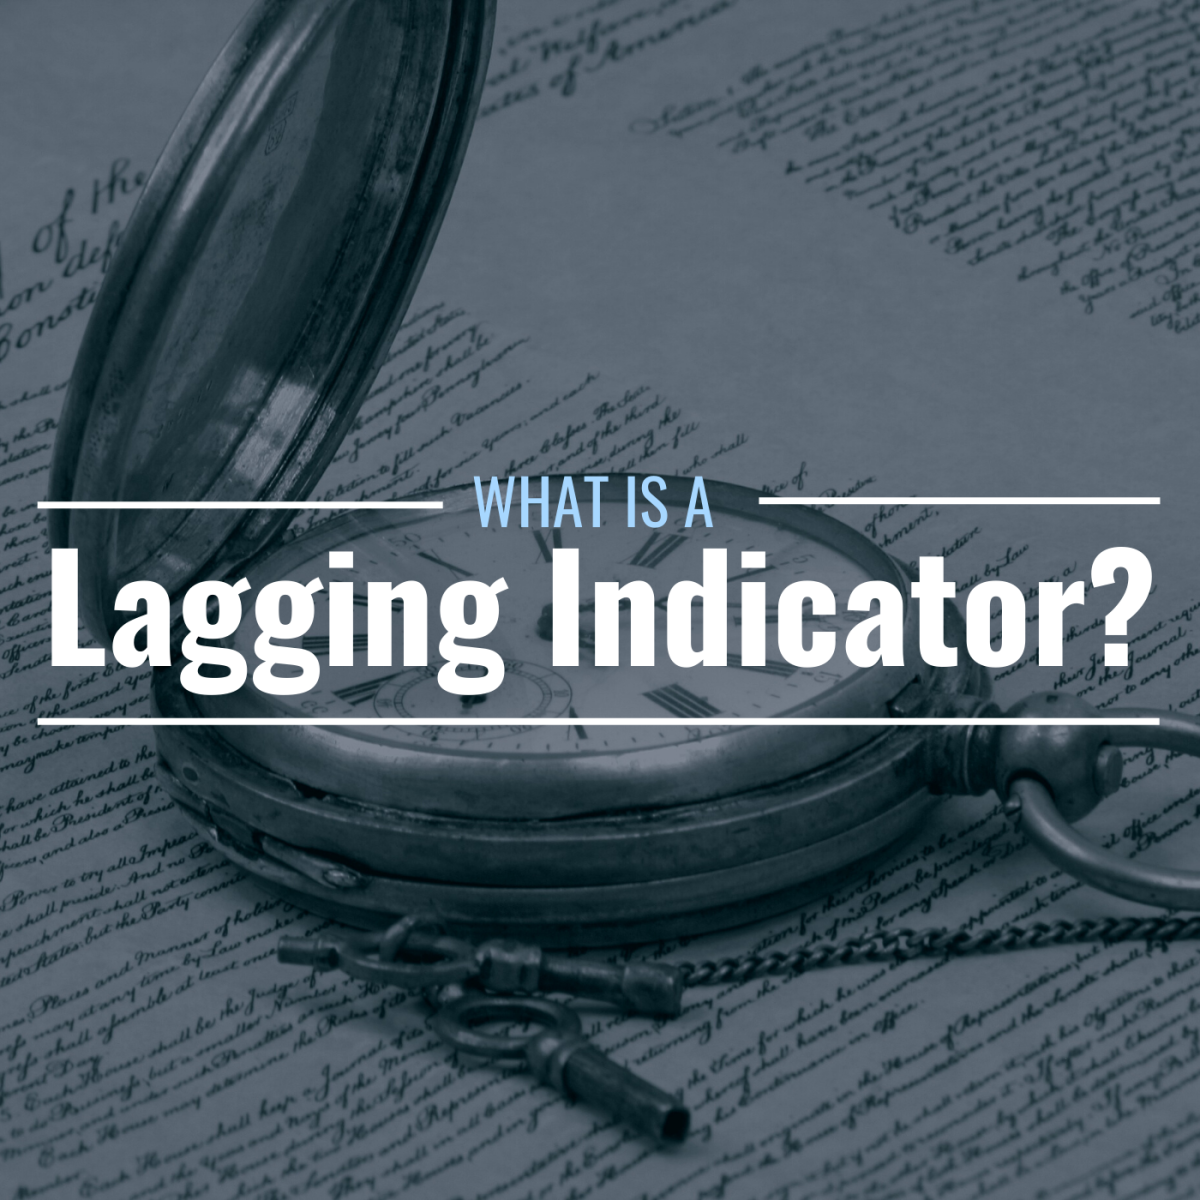 Image of historical parchment and a pocket watch with text overlay: "What Is a Lagging Indicator?"